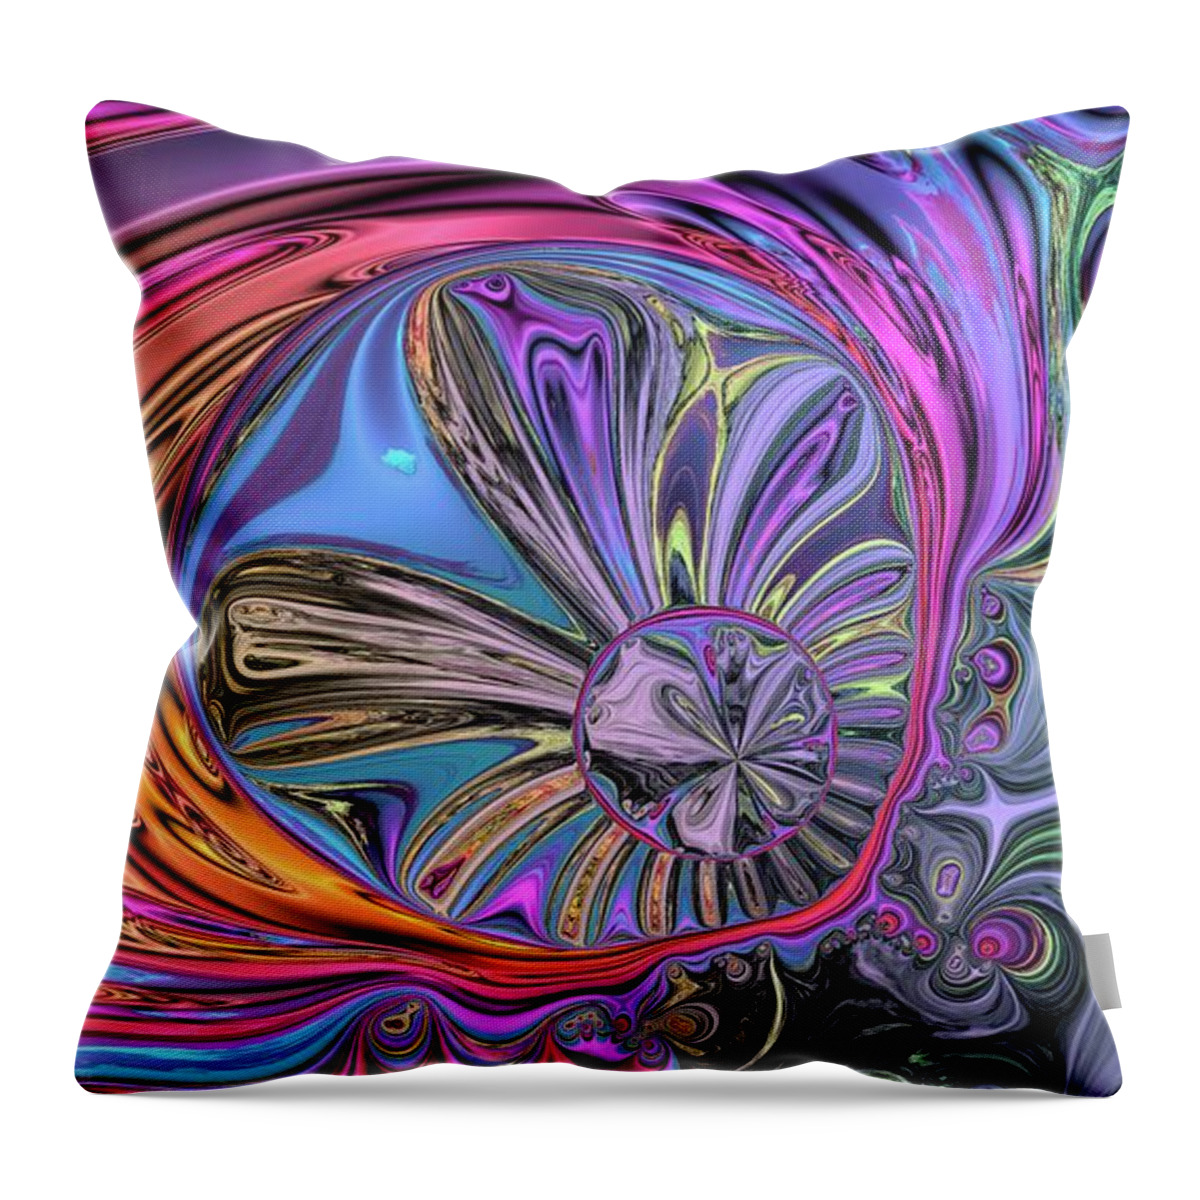  Throw Pillow featuring the digital art Attempting to Survive by Claude McCoy